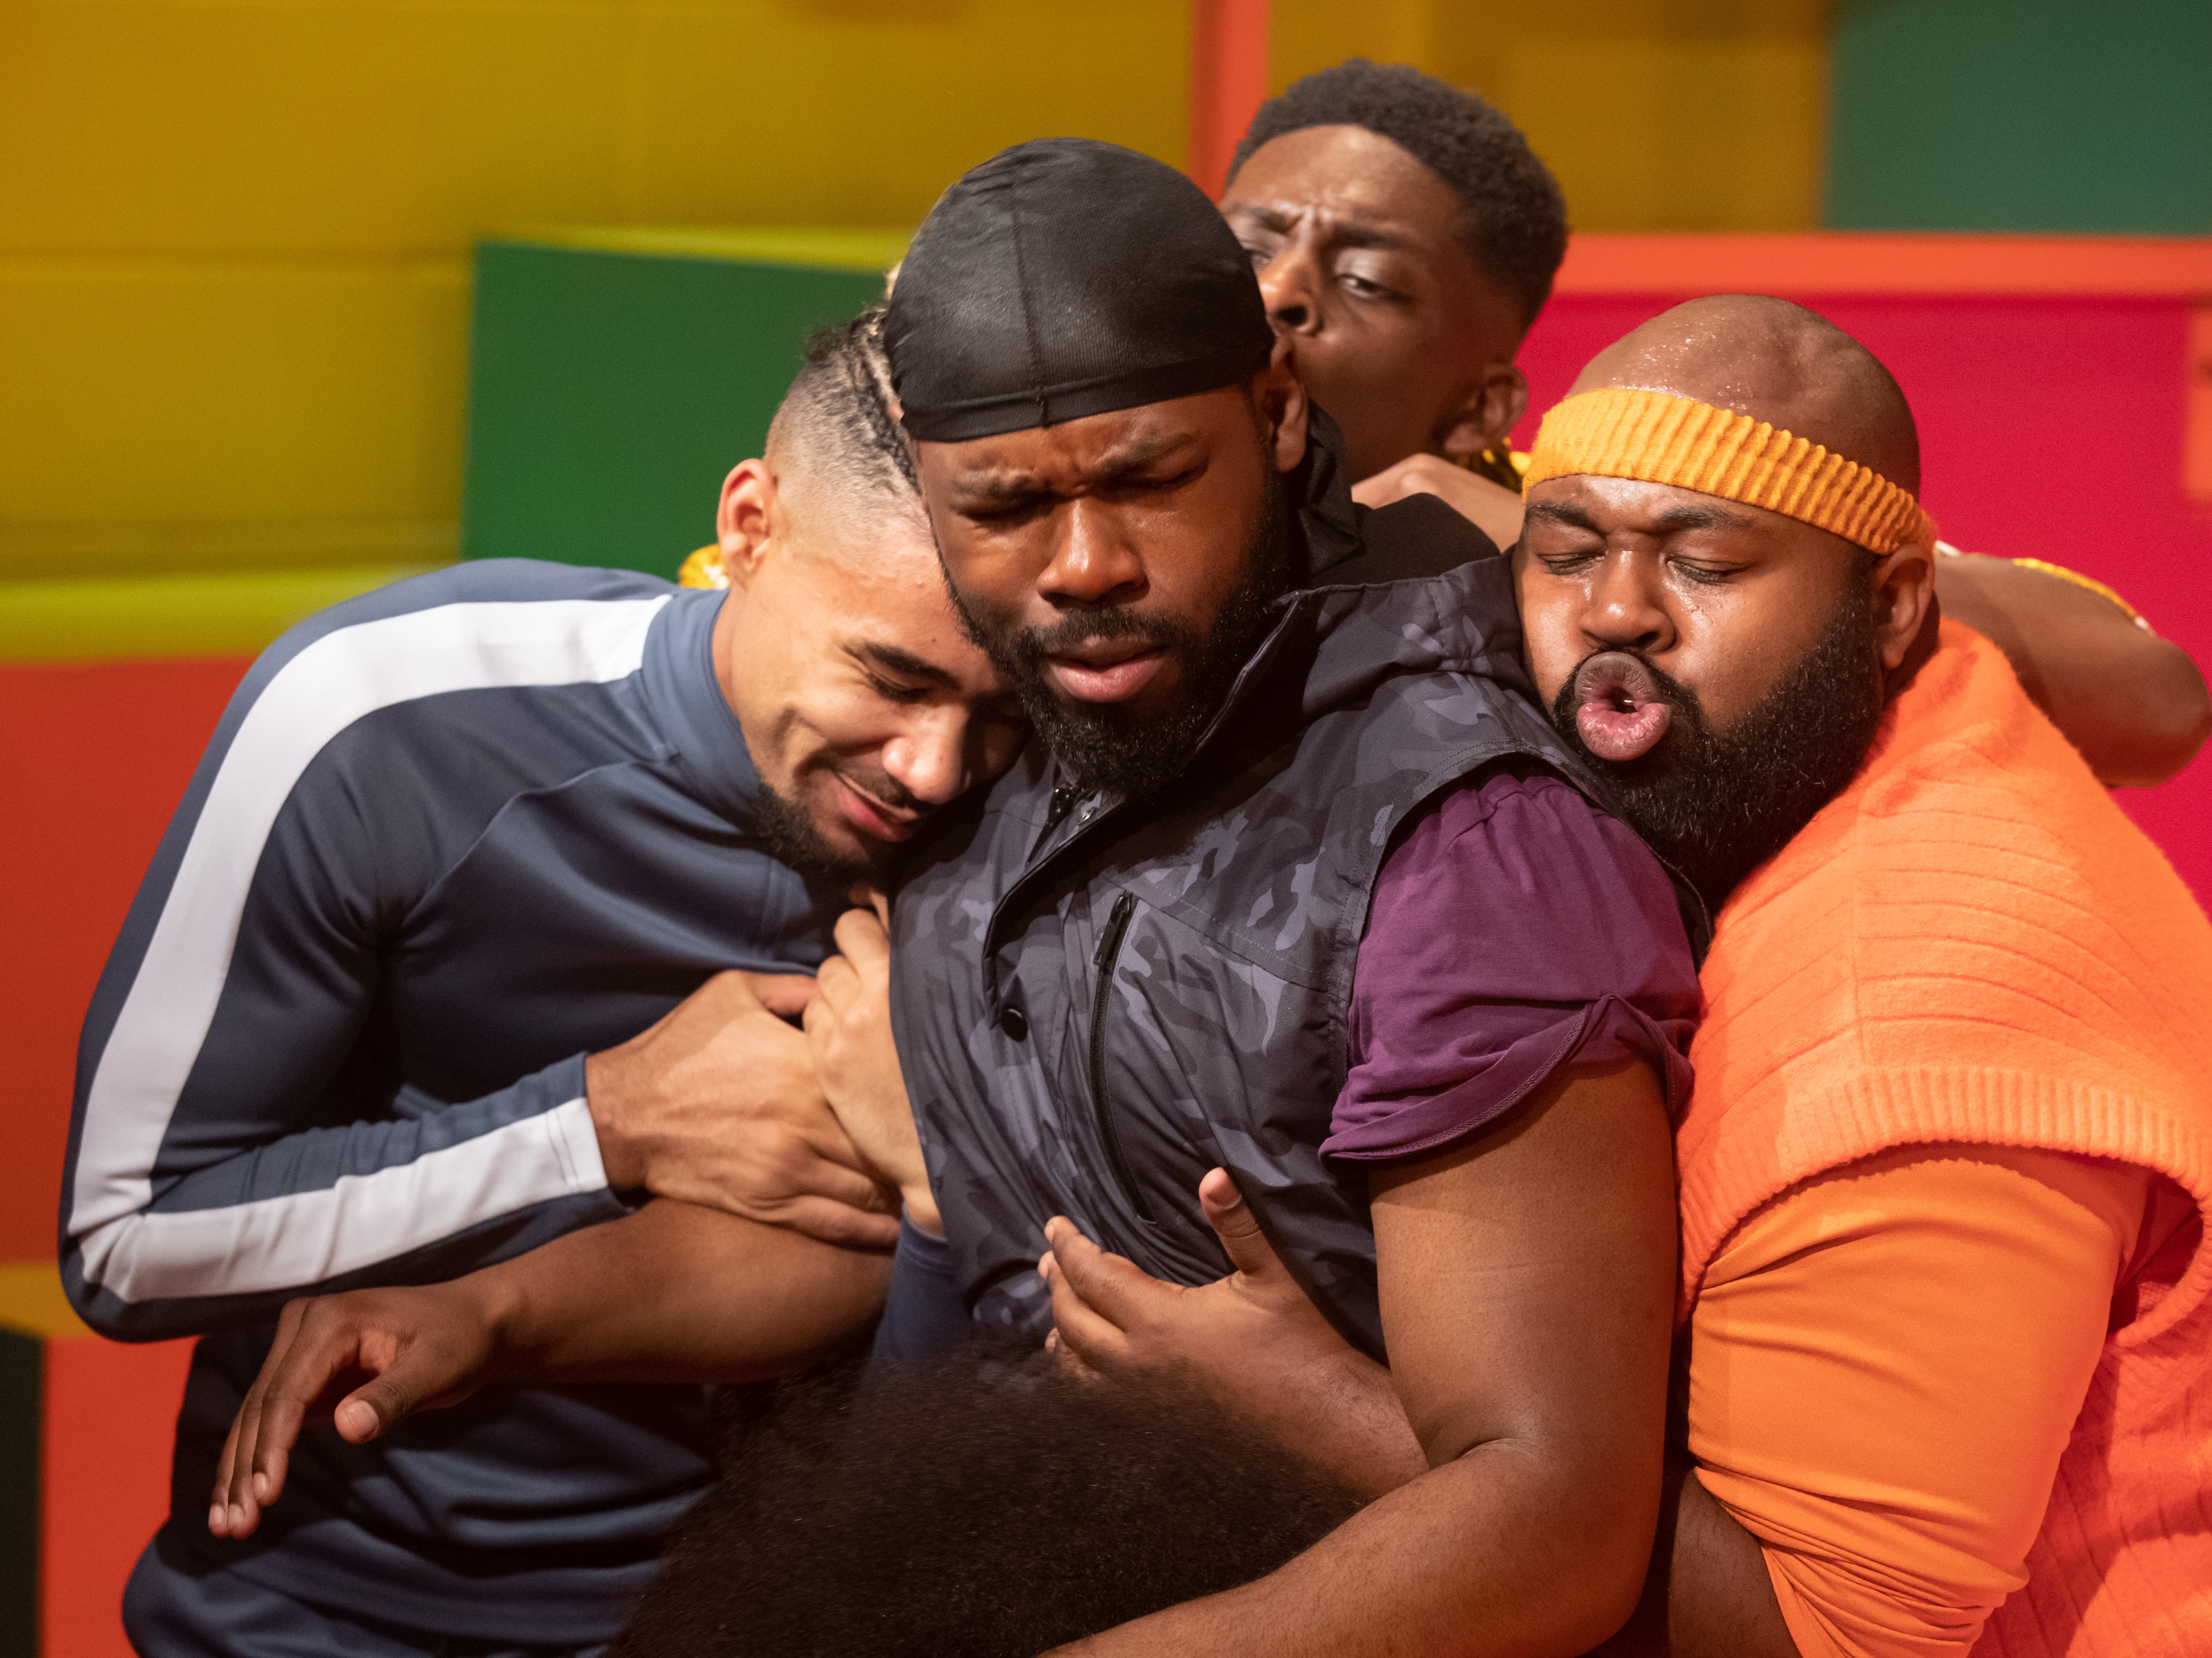 Hue and cry: the cast of ‘For Black Boys’